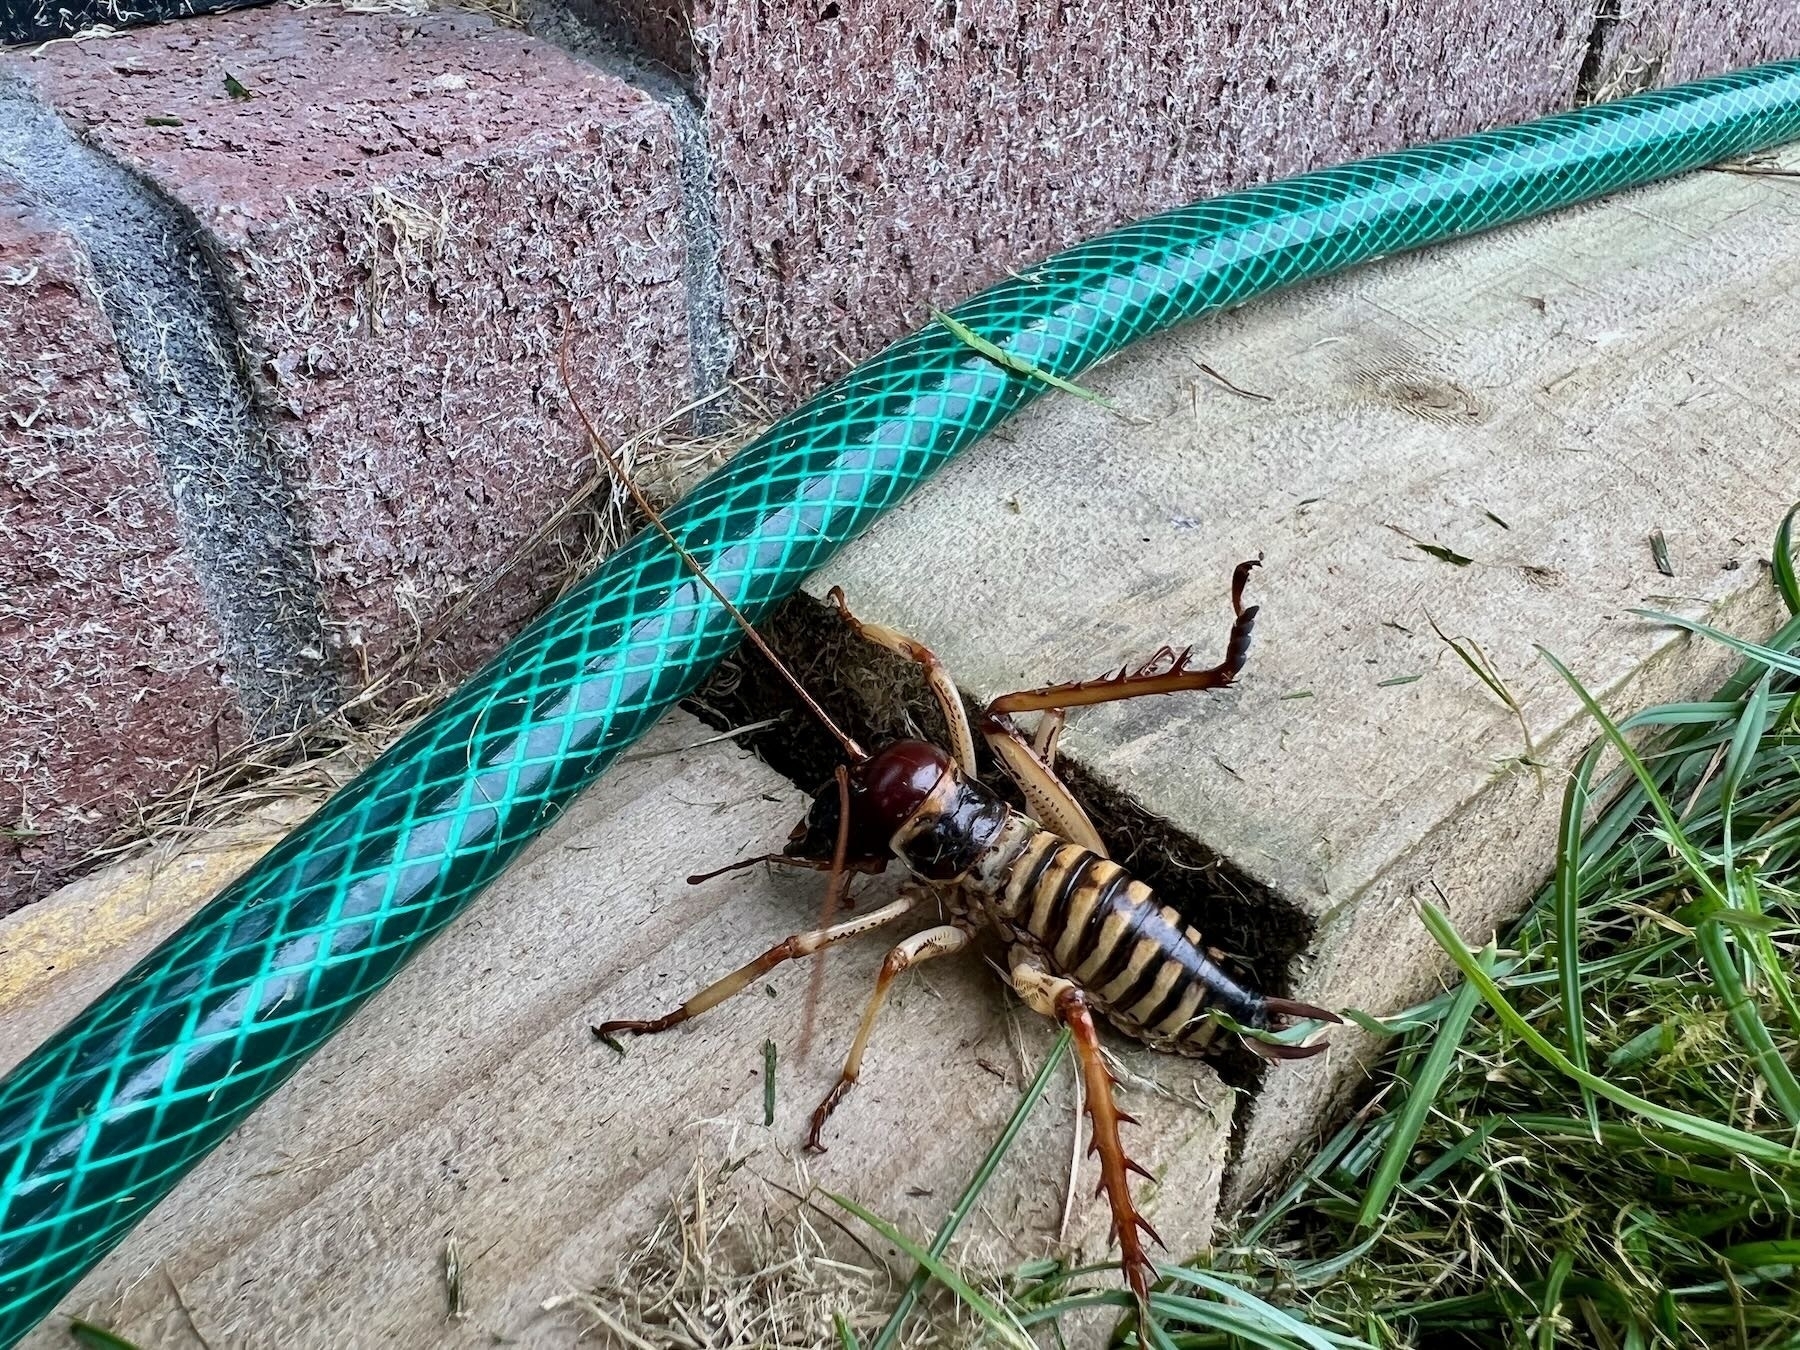 Scary looking insect on a plank by a garden hose. 